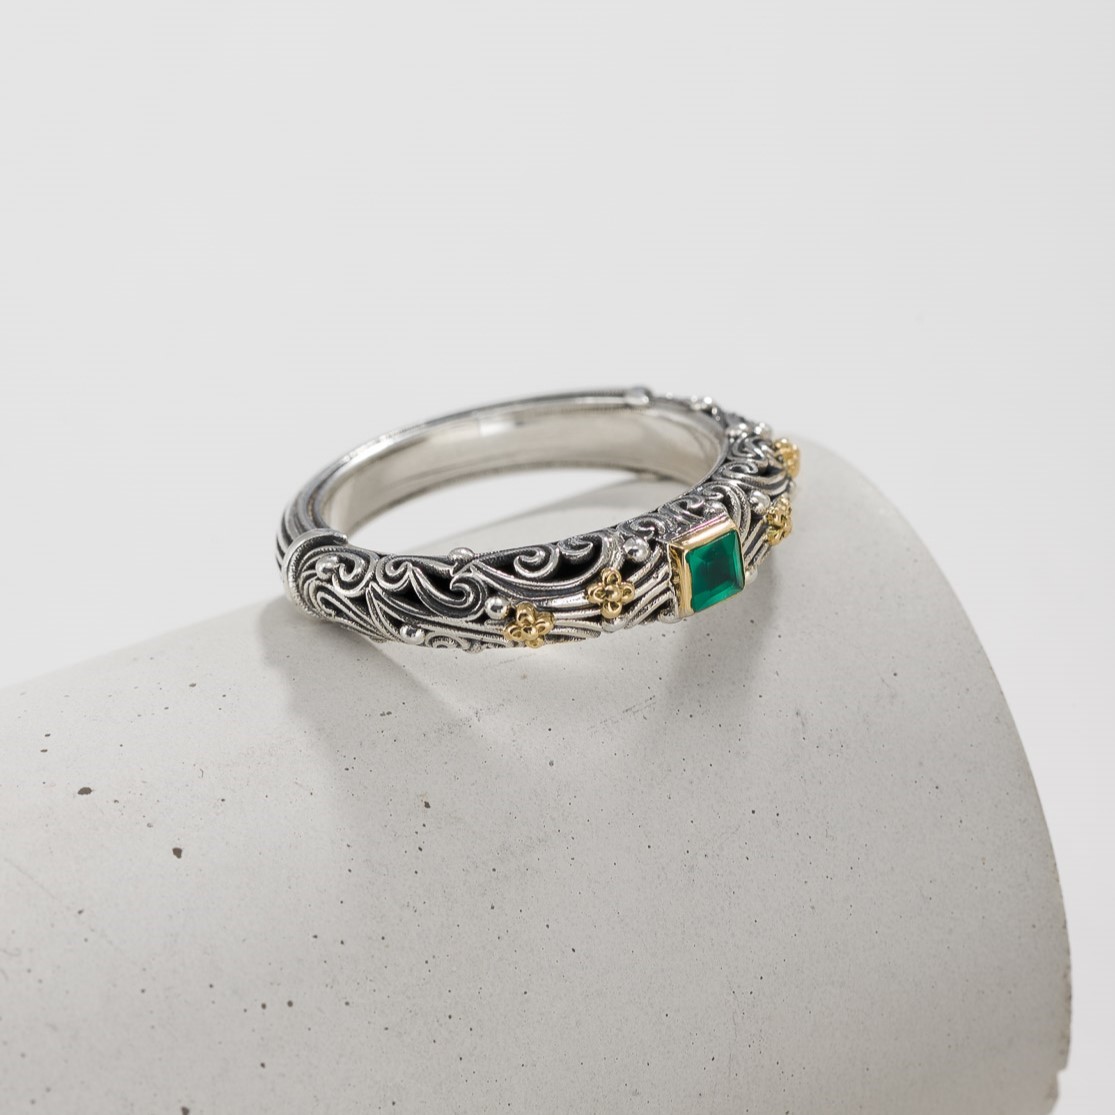 Kynthia Ring in 18K Gold and Sterling Silver with square semi precious stone